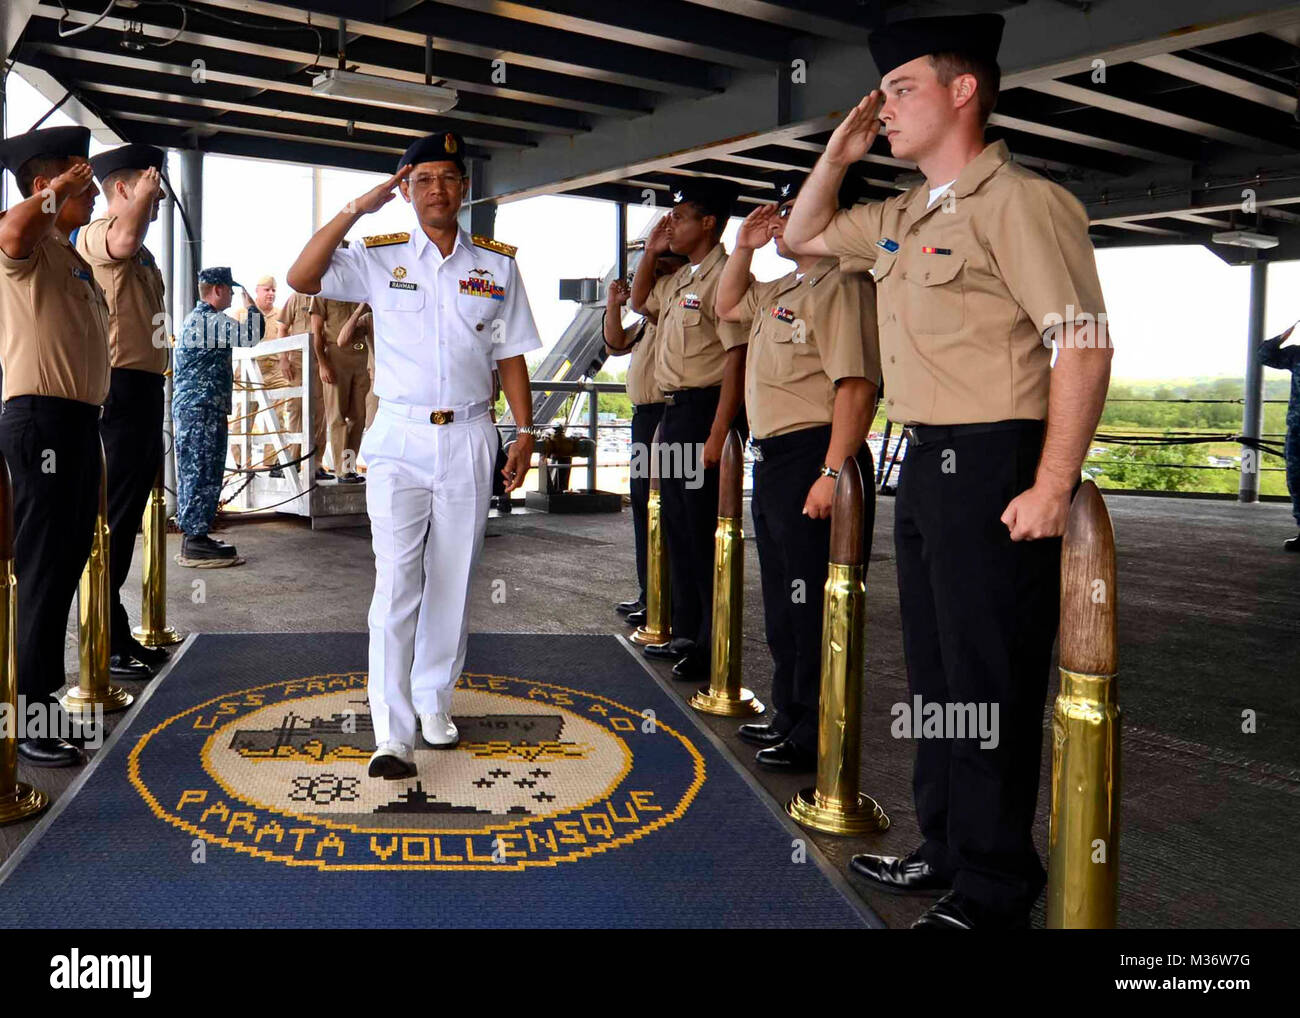 151201-N-RN782-012:  POLARIS POINT, Guam (Dec. 1, 2015) Side boys assigned to the submarine tender USS Frank Cable (AS 40) salute as Royal Malaysian Navy Rear Adm. Datuk Abdul Rahman Bin HJ. Ayob, commander, Submarine Force, comes aboard for a visit to the ship, Dec. 1.  Rahman visited Frank Cable for a luncheon hosted by Commander, Submarine Group Seven, Rear Adm. William Merz.  The luncheon was just one of a series of events scheduled as part of submarine staff talks between Malaysia and the United States.  Frank Cable, forward deployed to the island of Guam, conducts maintenance and support Stock Photo